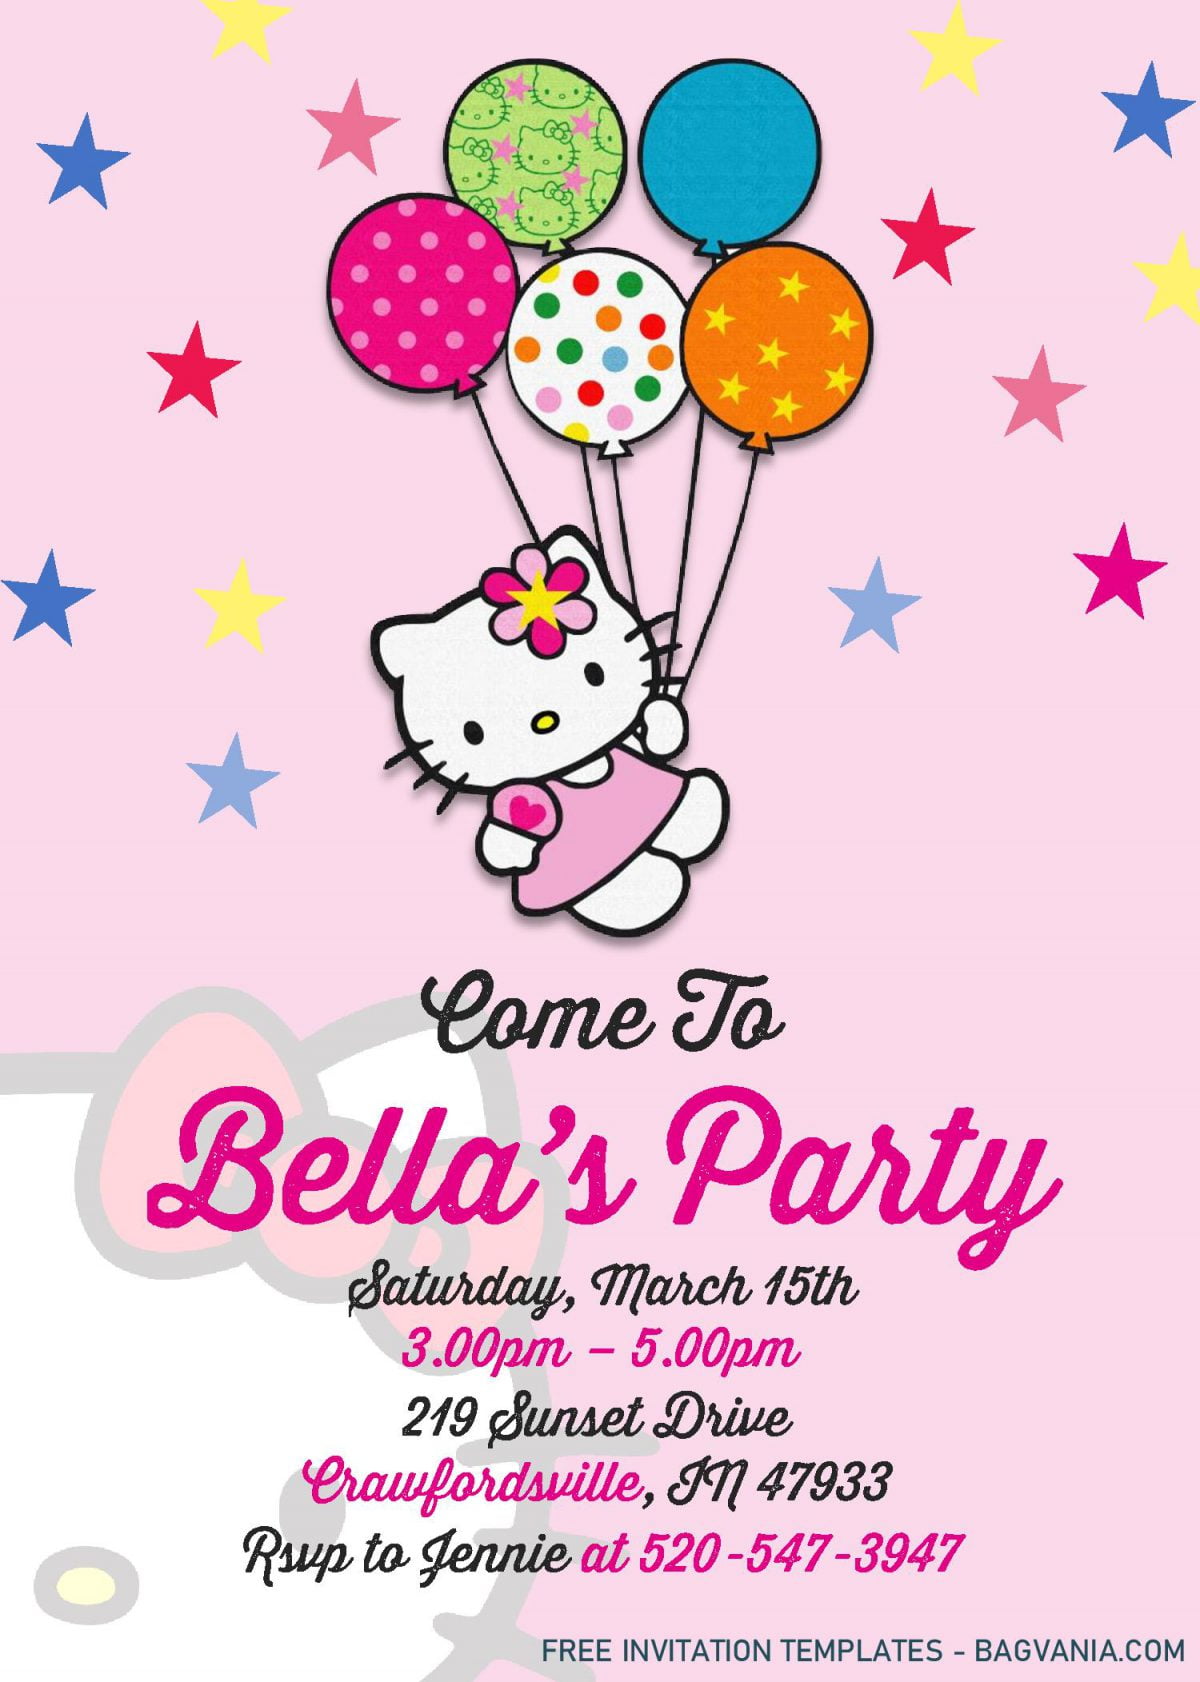 Hello Kitty Invitation Templates - Editable With MS Word and has pink background